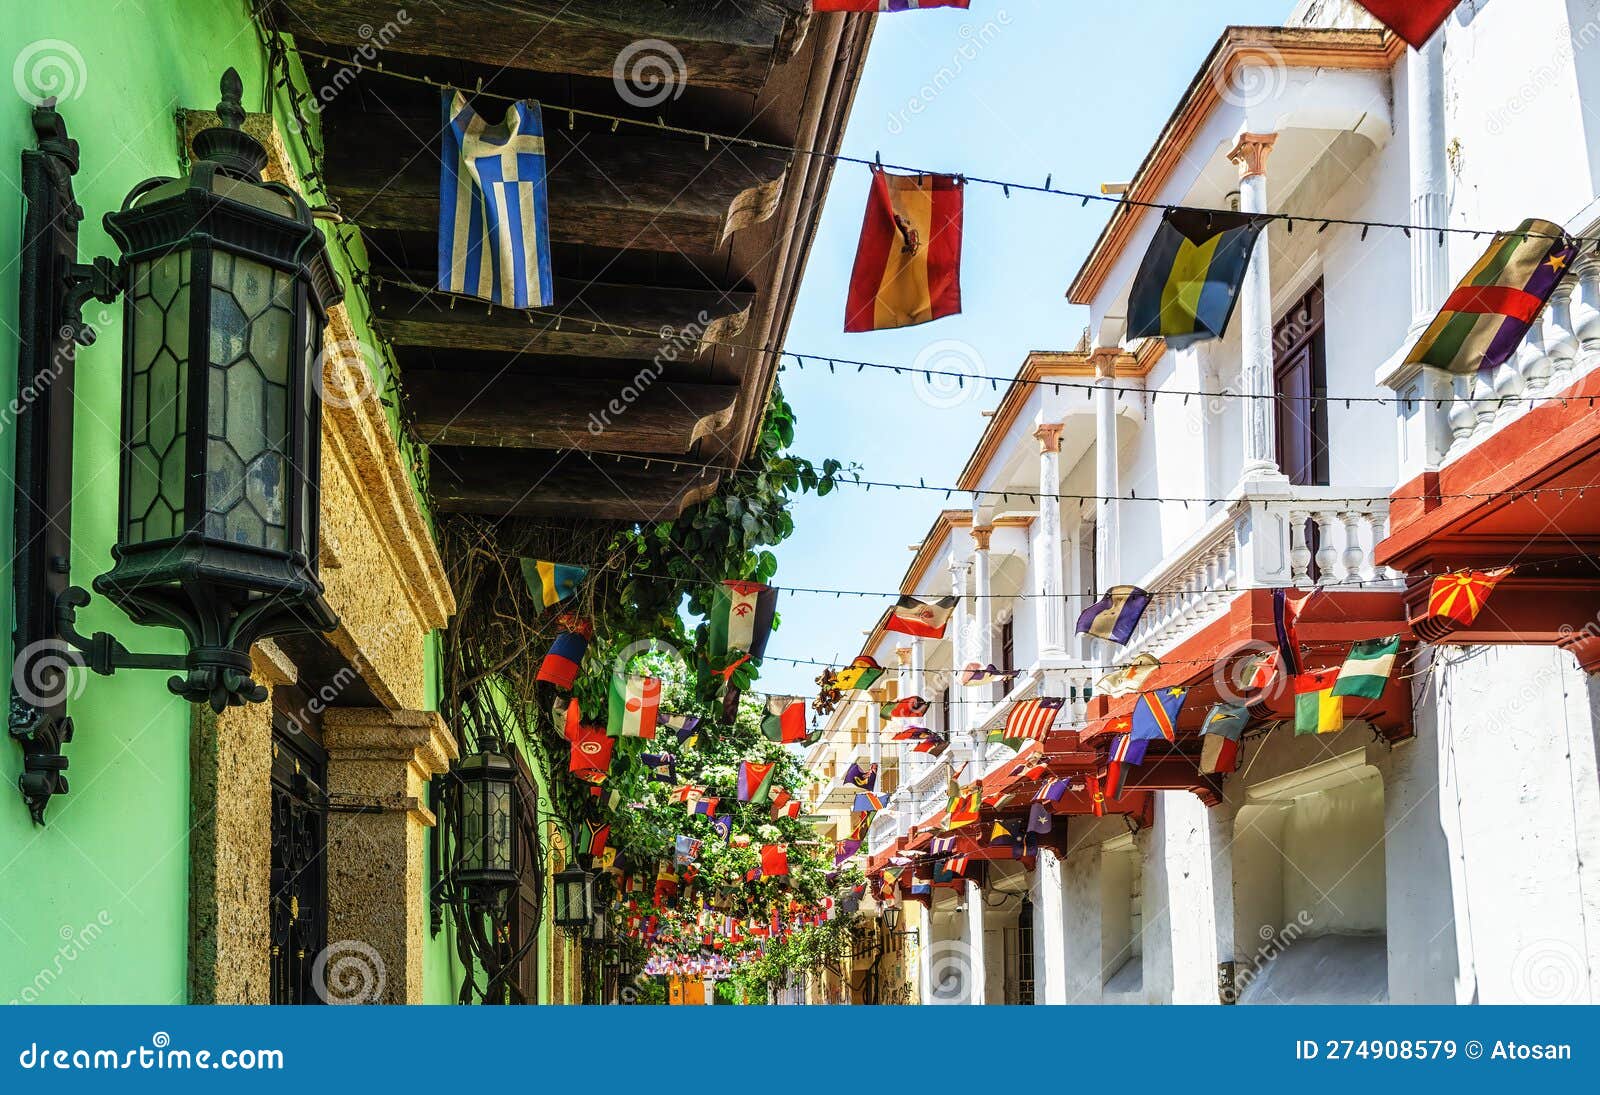 colombia, scenic colorful streets of cartagena in historic getsemani district